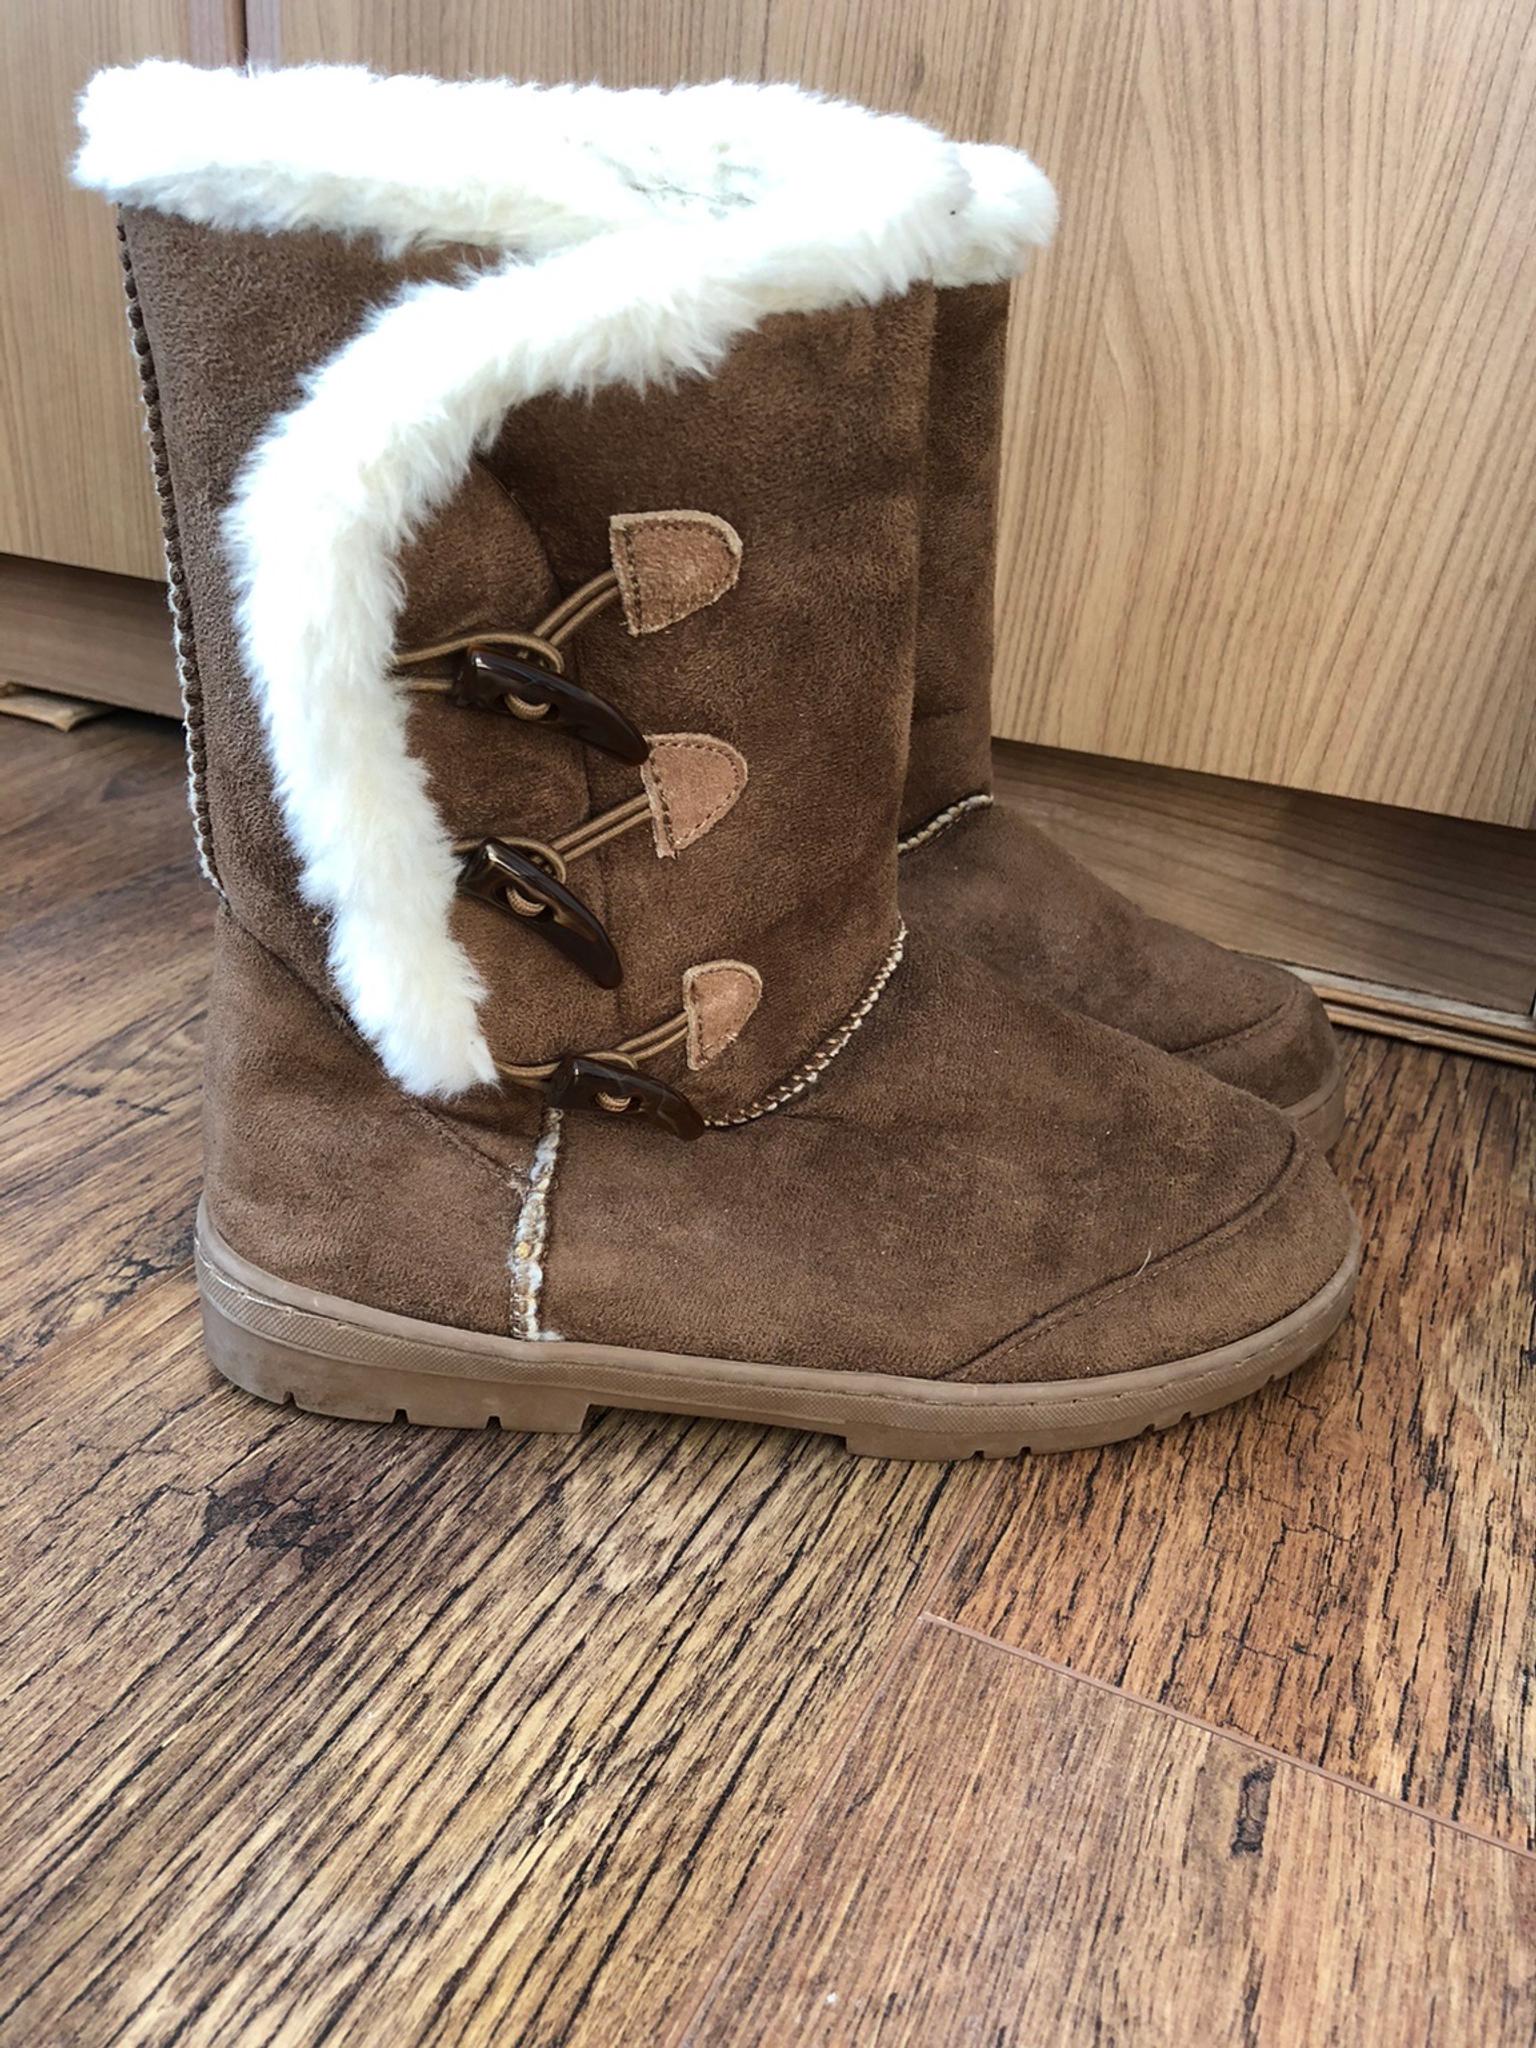 brown ugg style boots